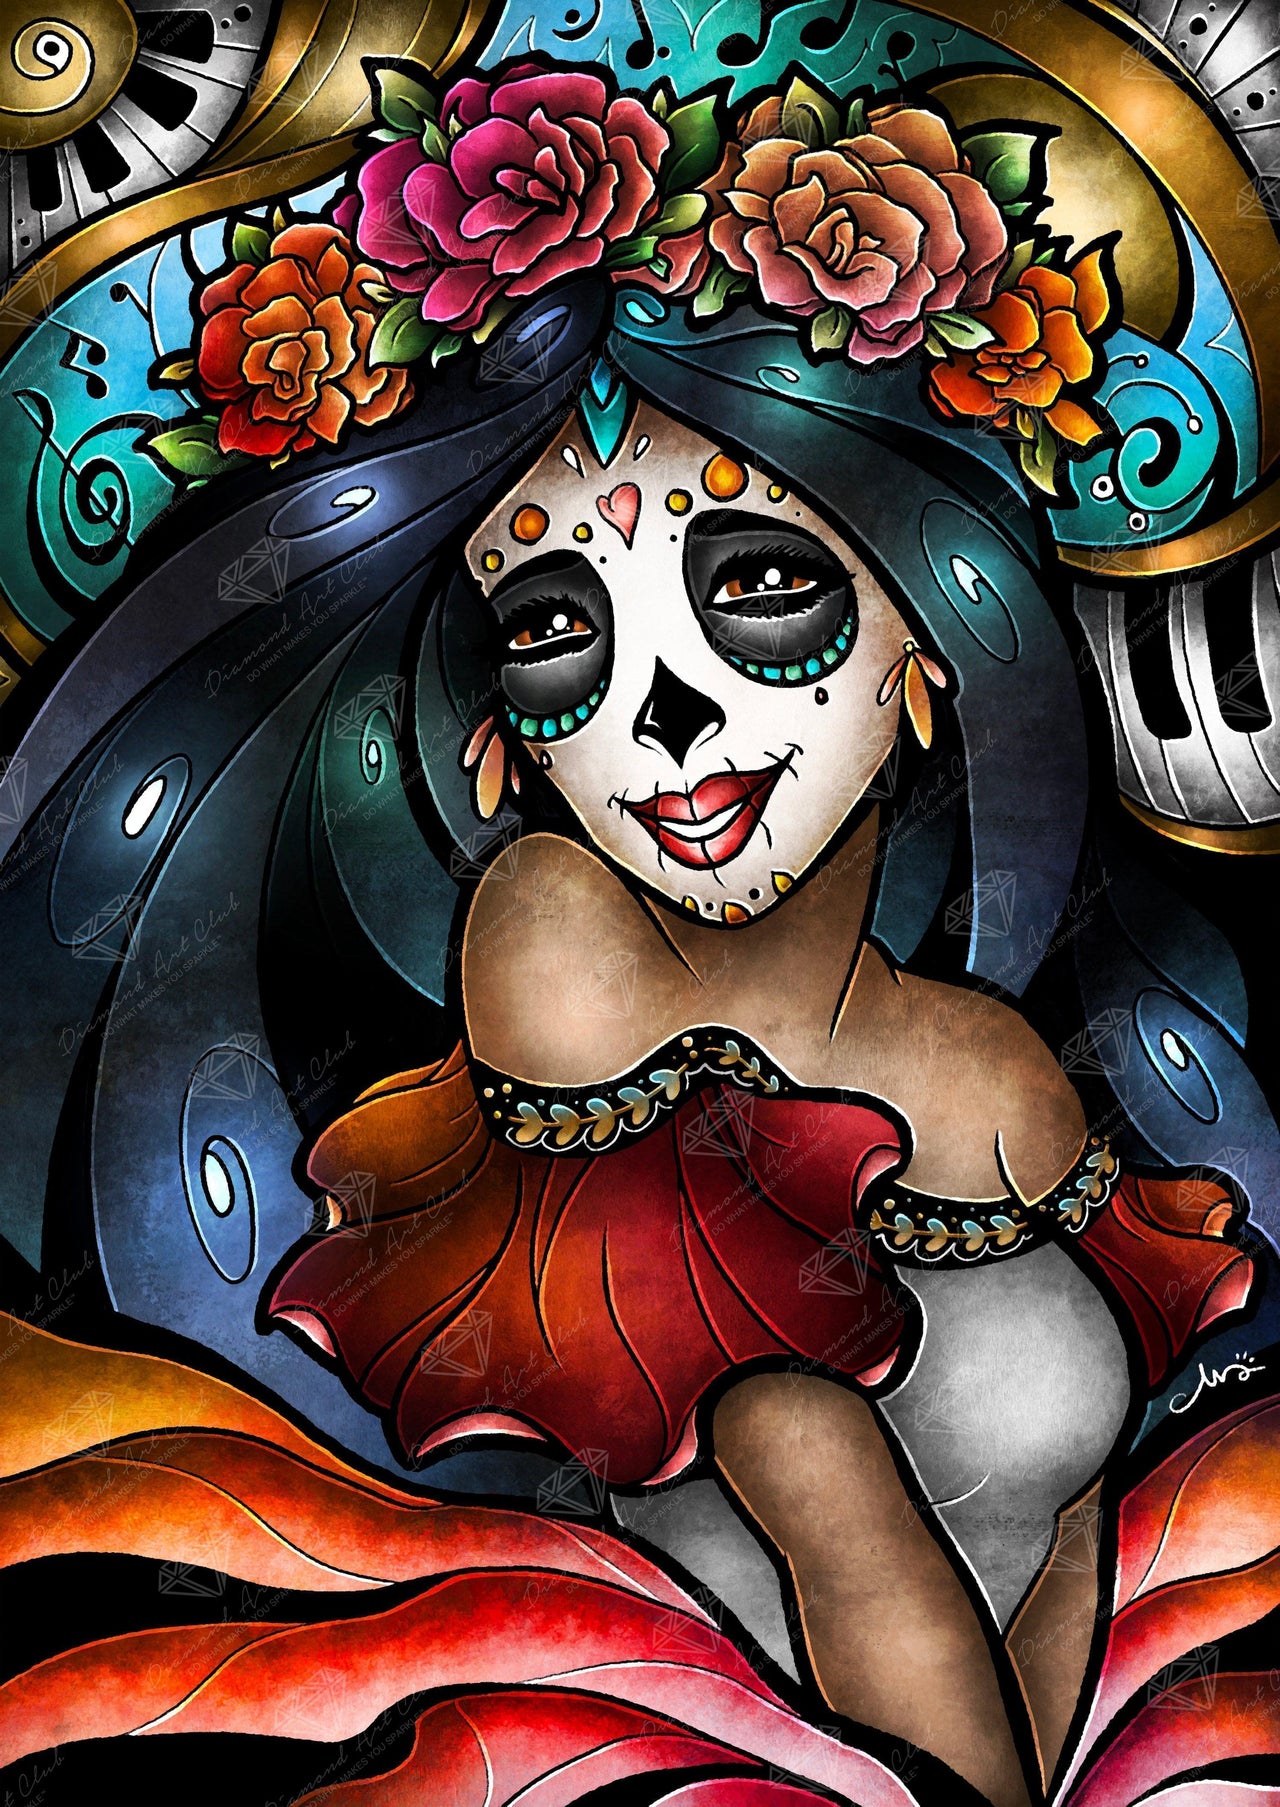 Diamond Painting La Catrina 22" x 31″ (56cm x 79cm) / Round with 55 Colors including 3 ABs / 55,922